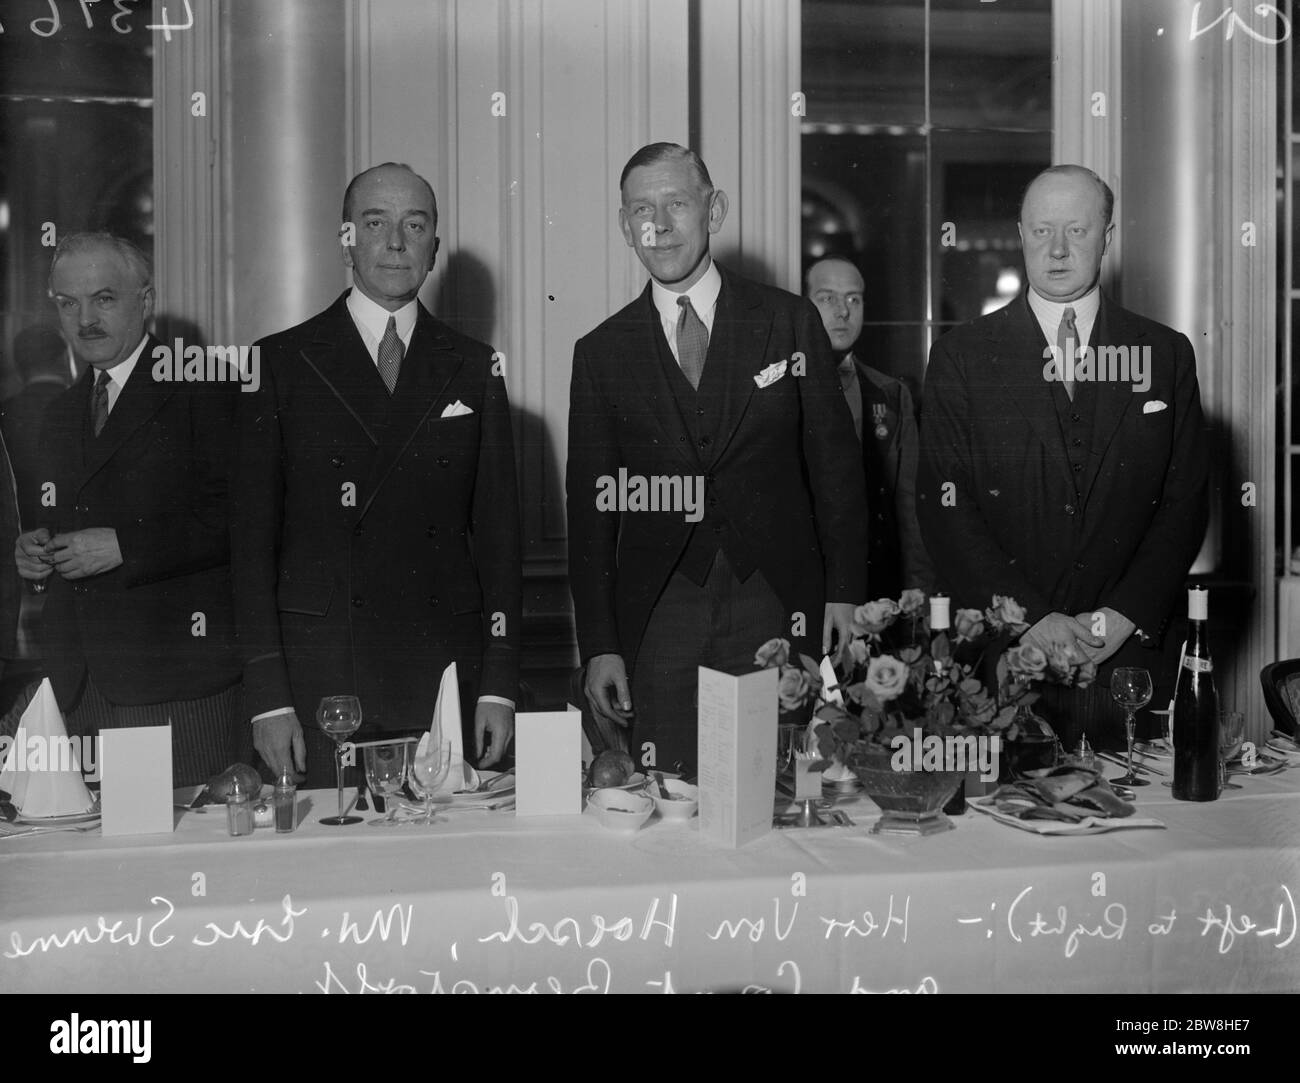 The German Ambassador attends foreign press association luncheon at the Savoy hotel , London . Left to right The German Ambassador , Herr von Hoesch , Mr Eric Swenne ( President ) and Count Bernstorff . 17 November 1932 Stock Photo